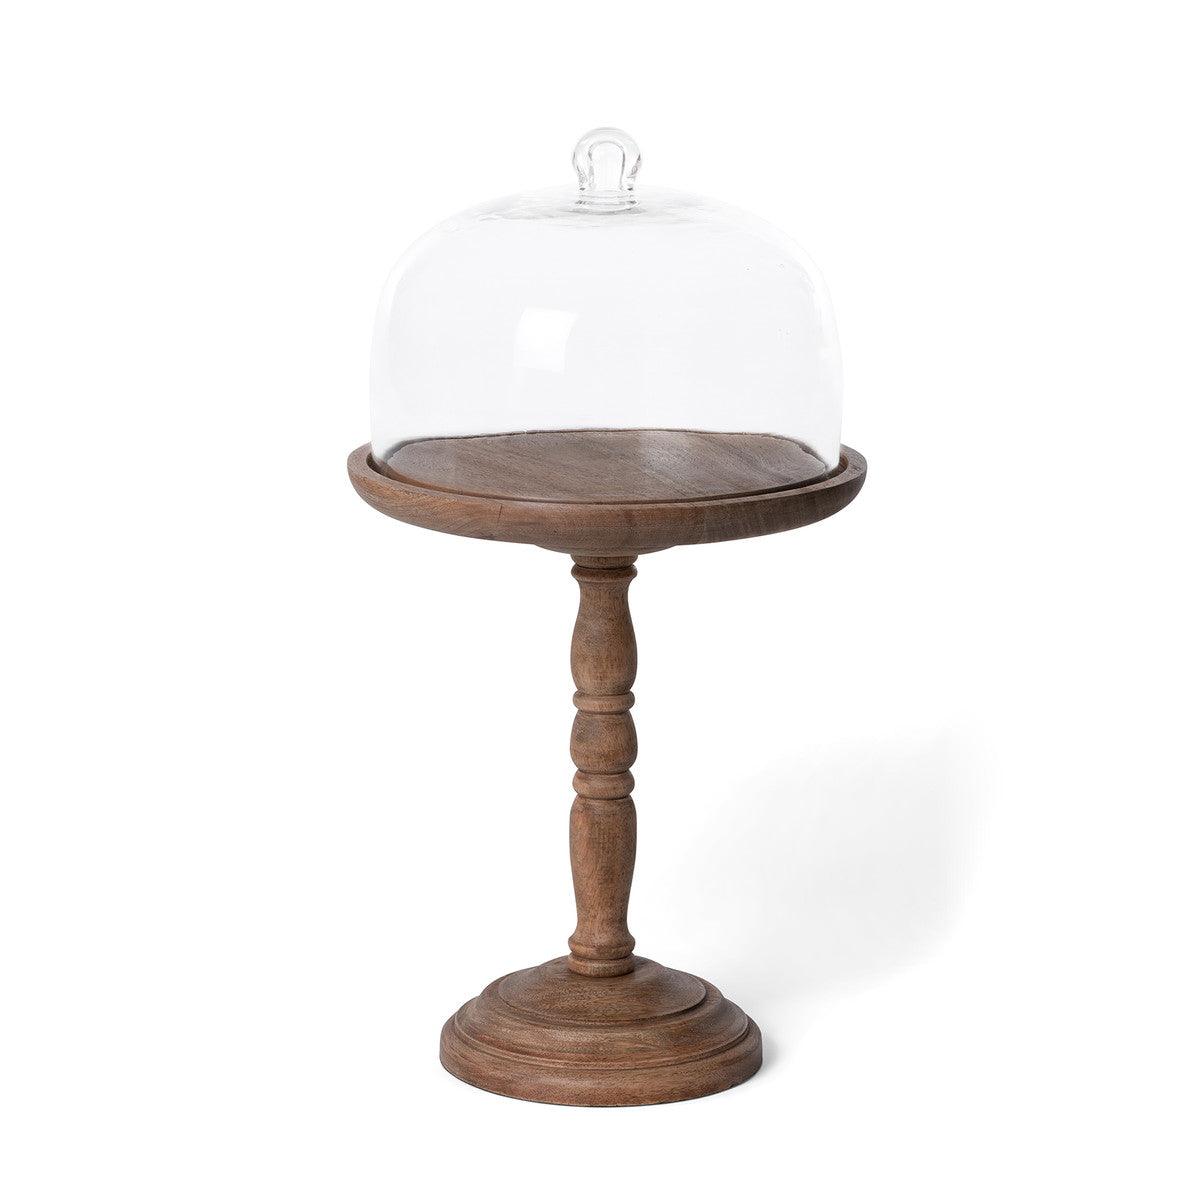 Elevated Wood Server with Glass Dome, 20" - Signastyle Boutique